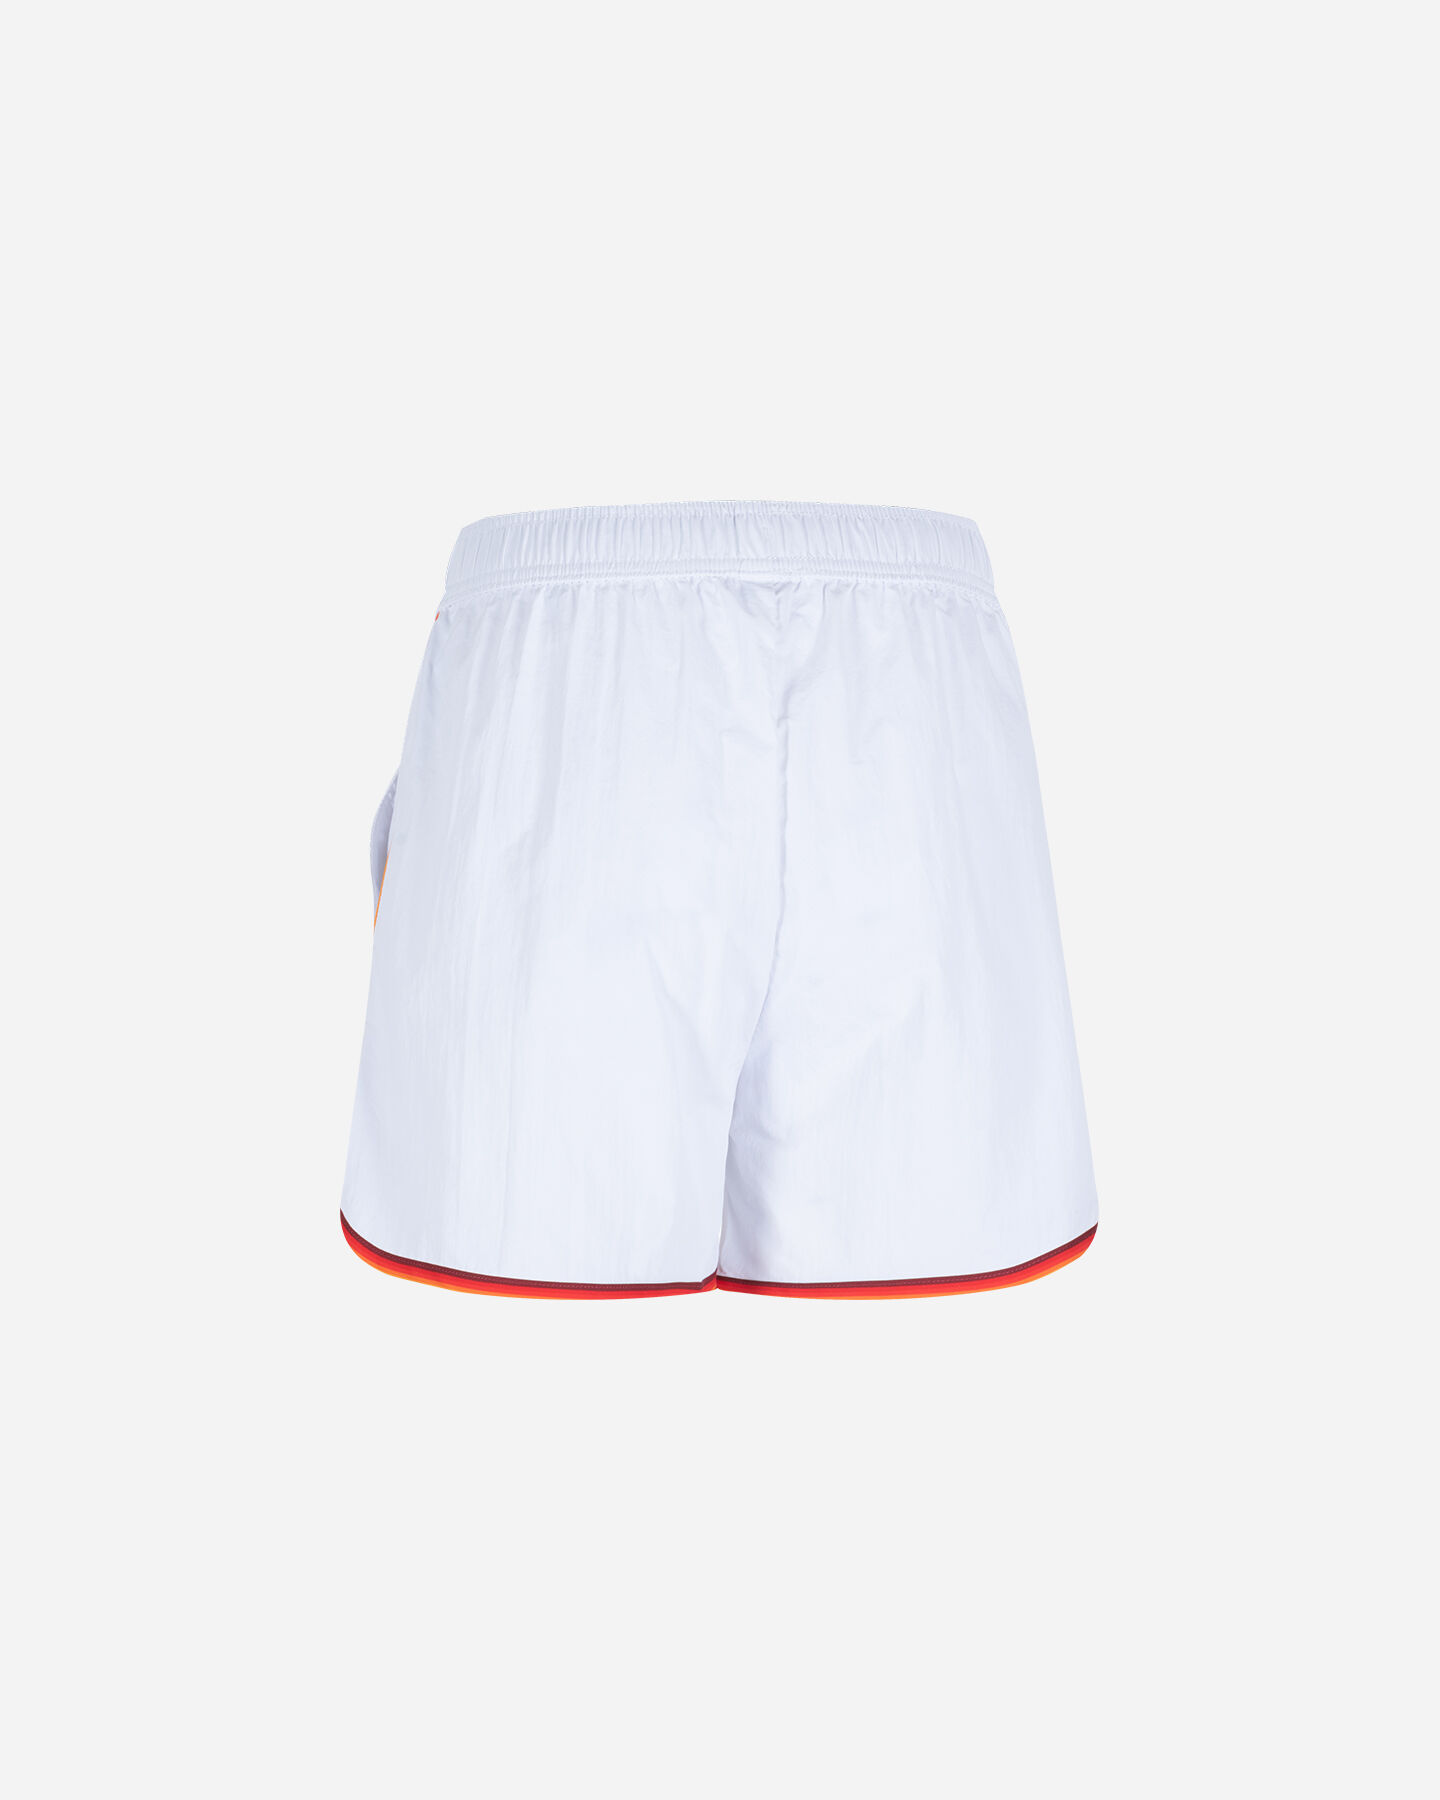  Boxer mare ELLESSE VOLLEY BAND M S4121599|001|S scatto 5